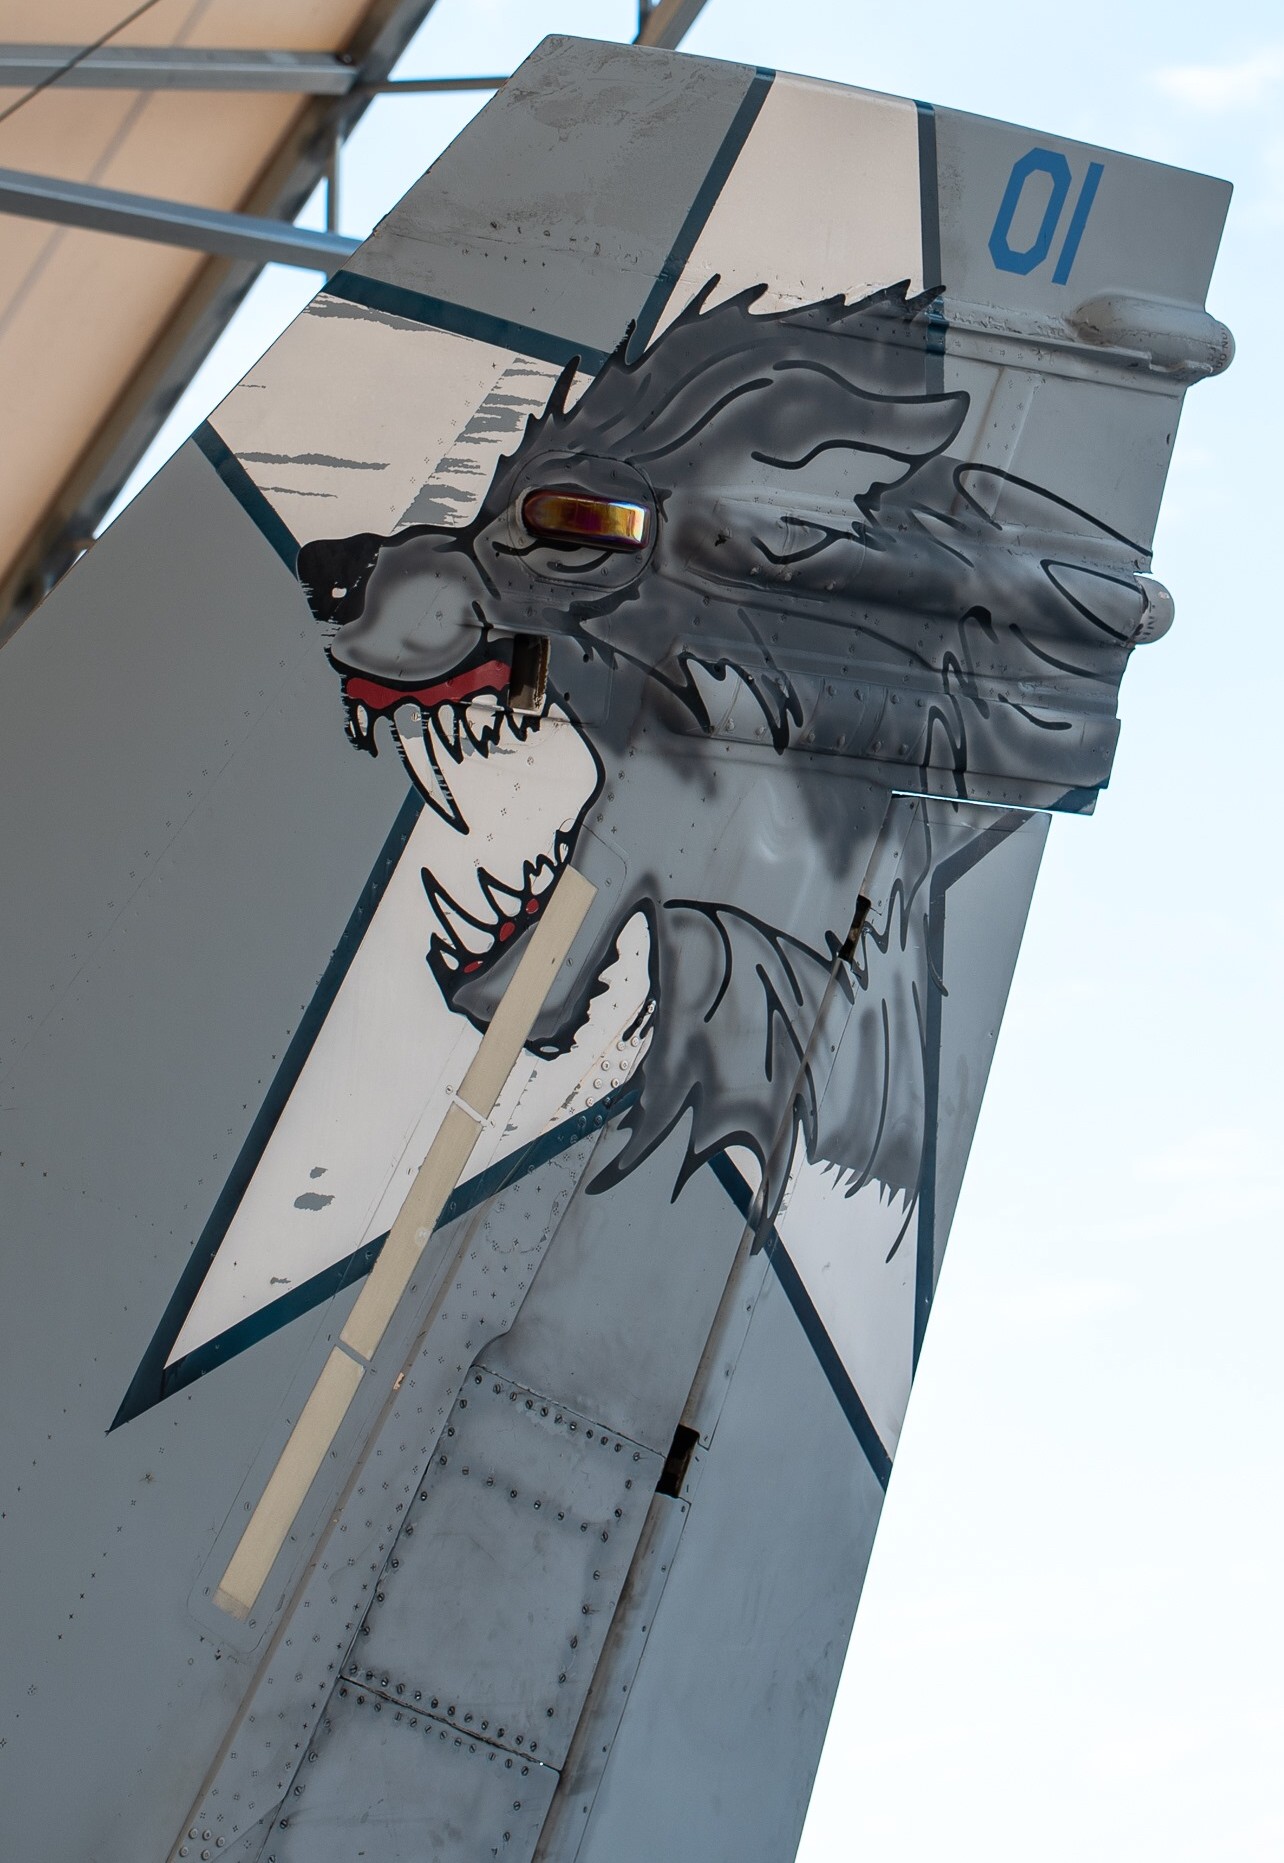 vmfa-112 cowboys marine fighter attack squadron usmc f/a-18c hornet 56 special colour painting